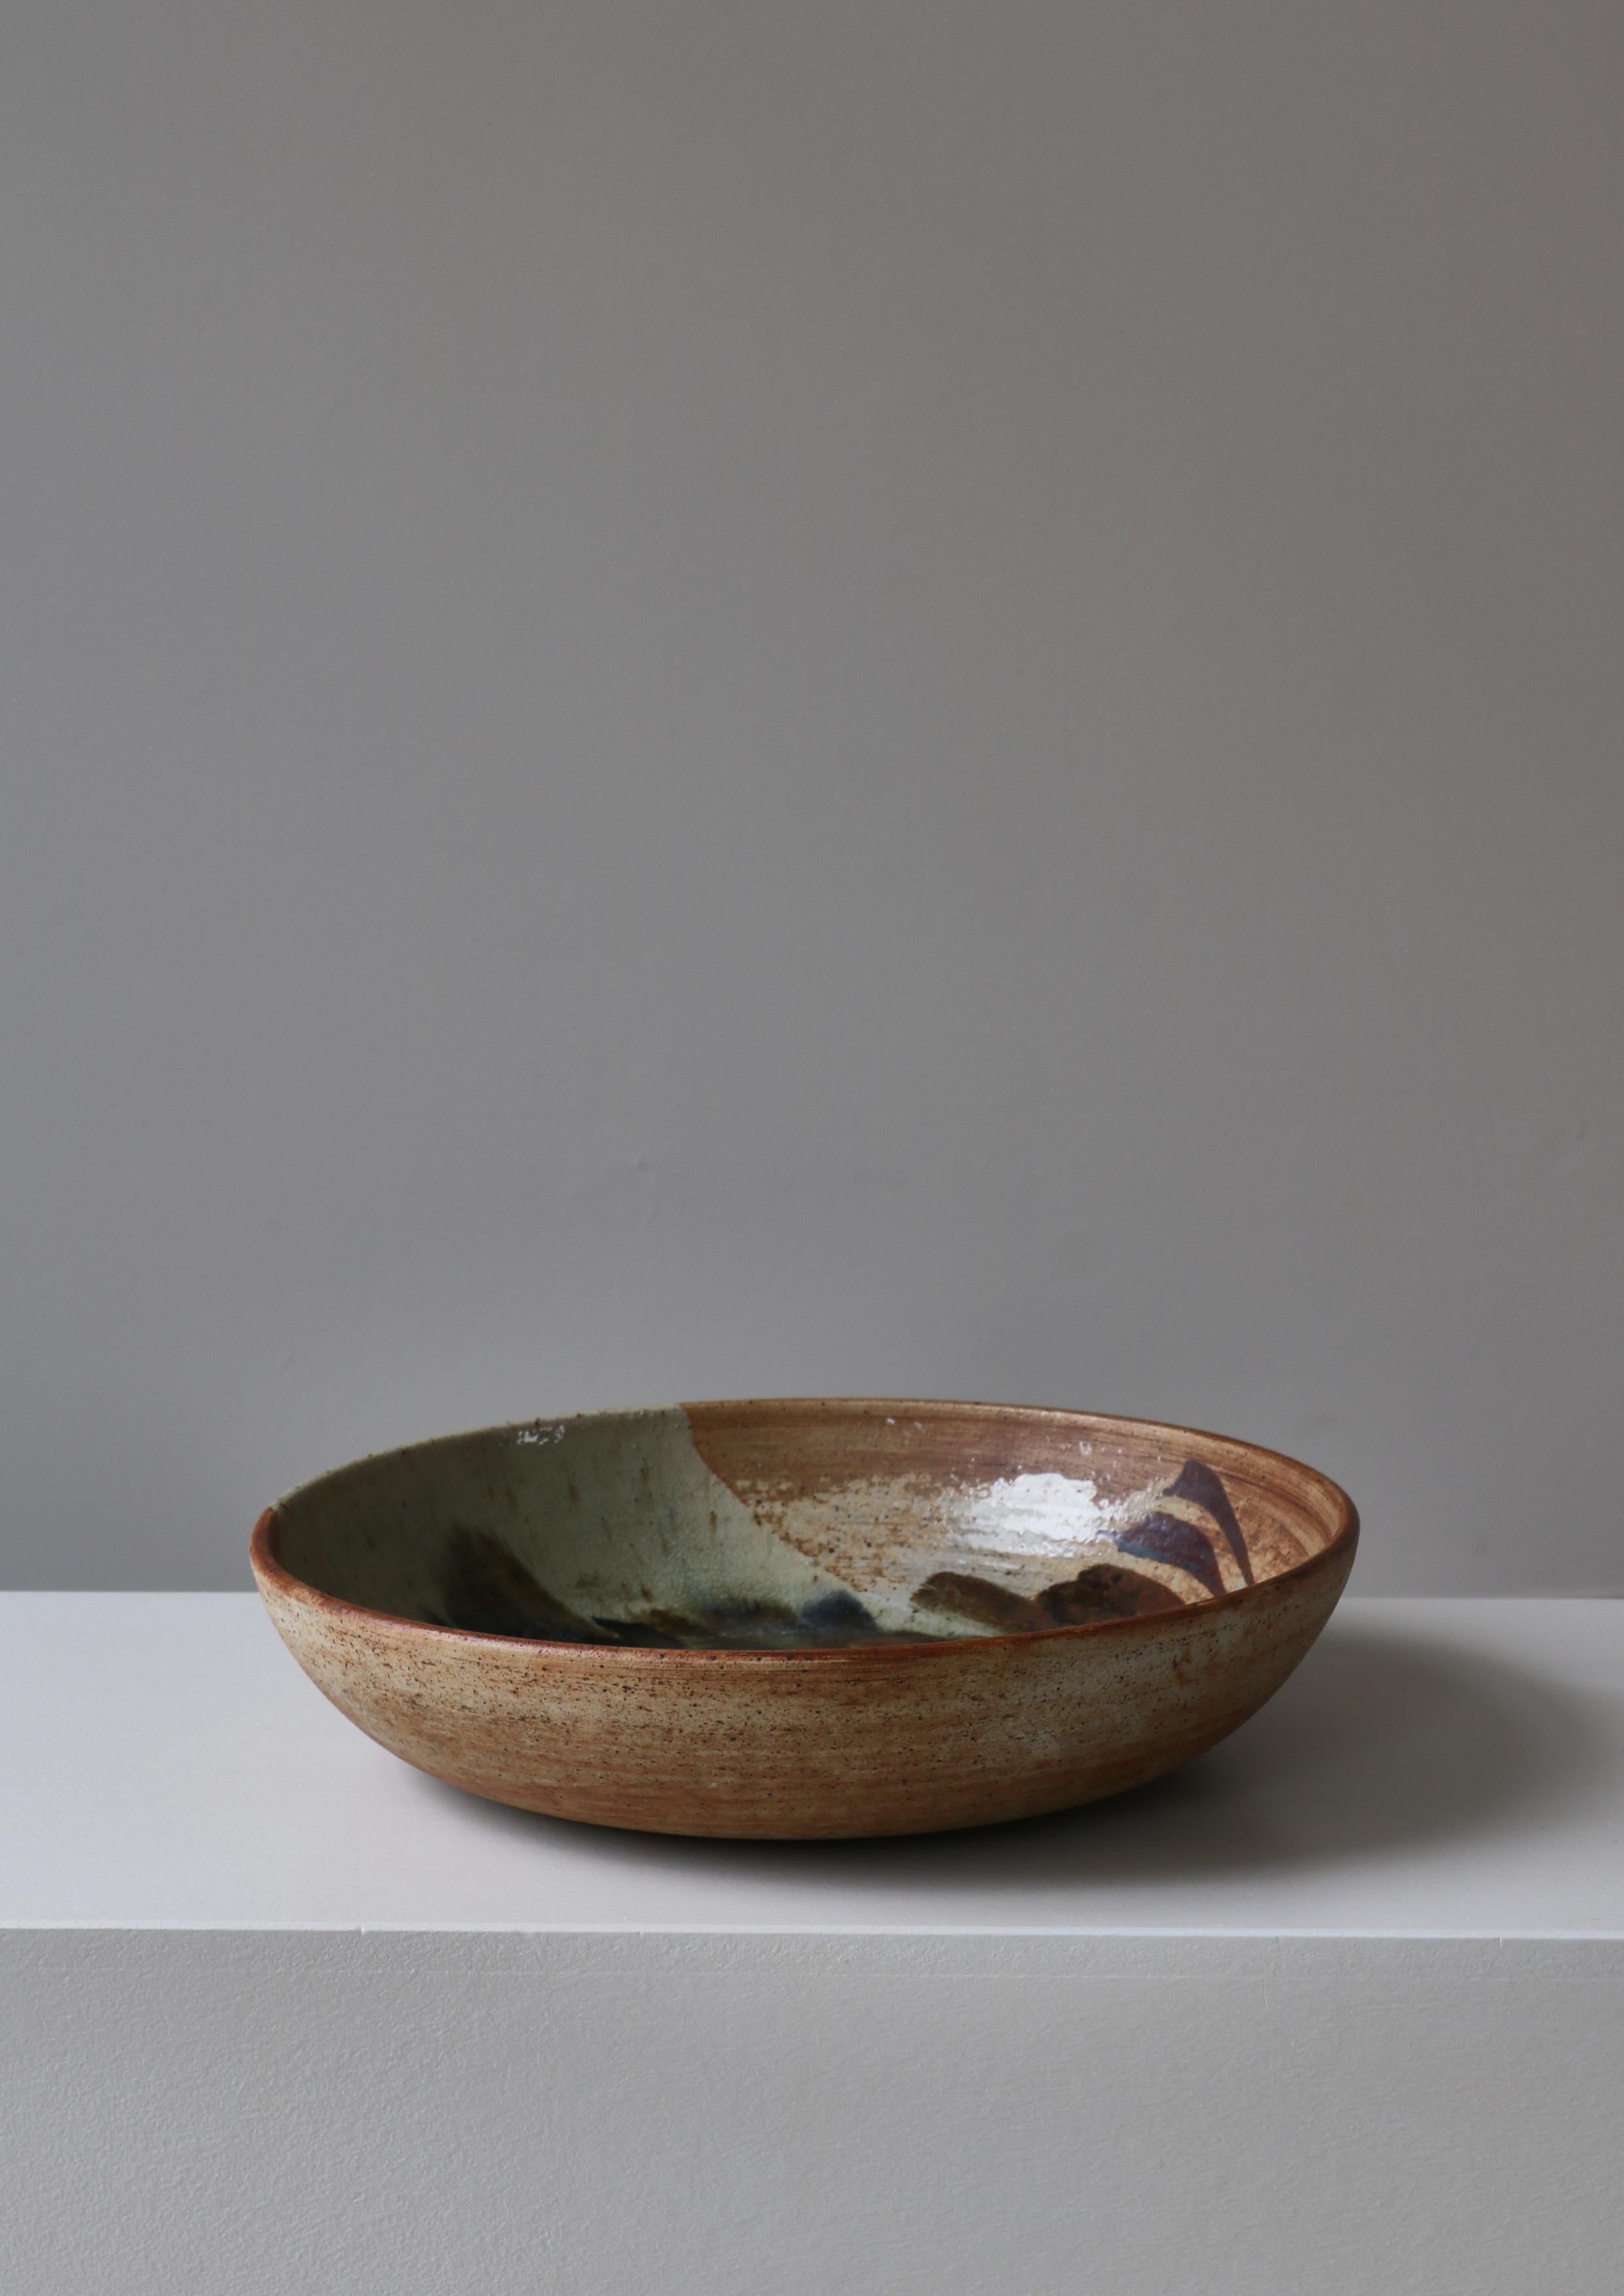 Large Unique Stoneware Bowl by Conny Walther, Danish Modern, 1960s For Sale 5